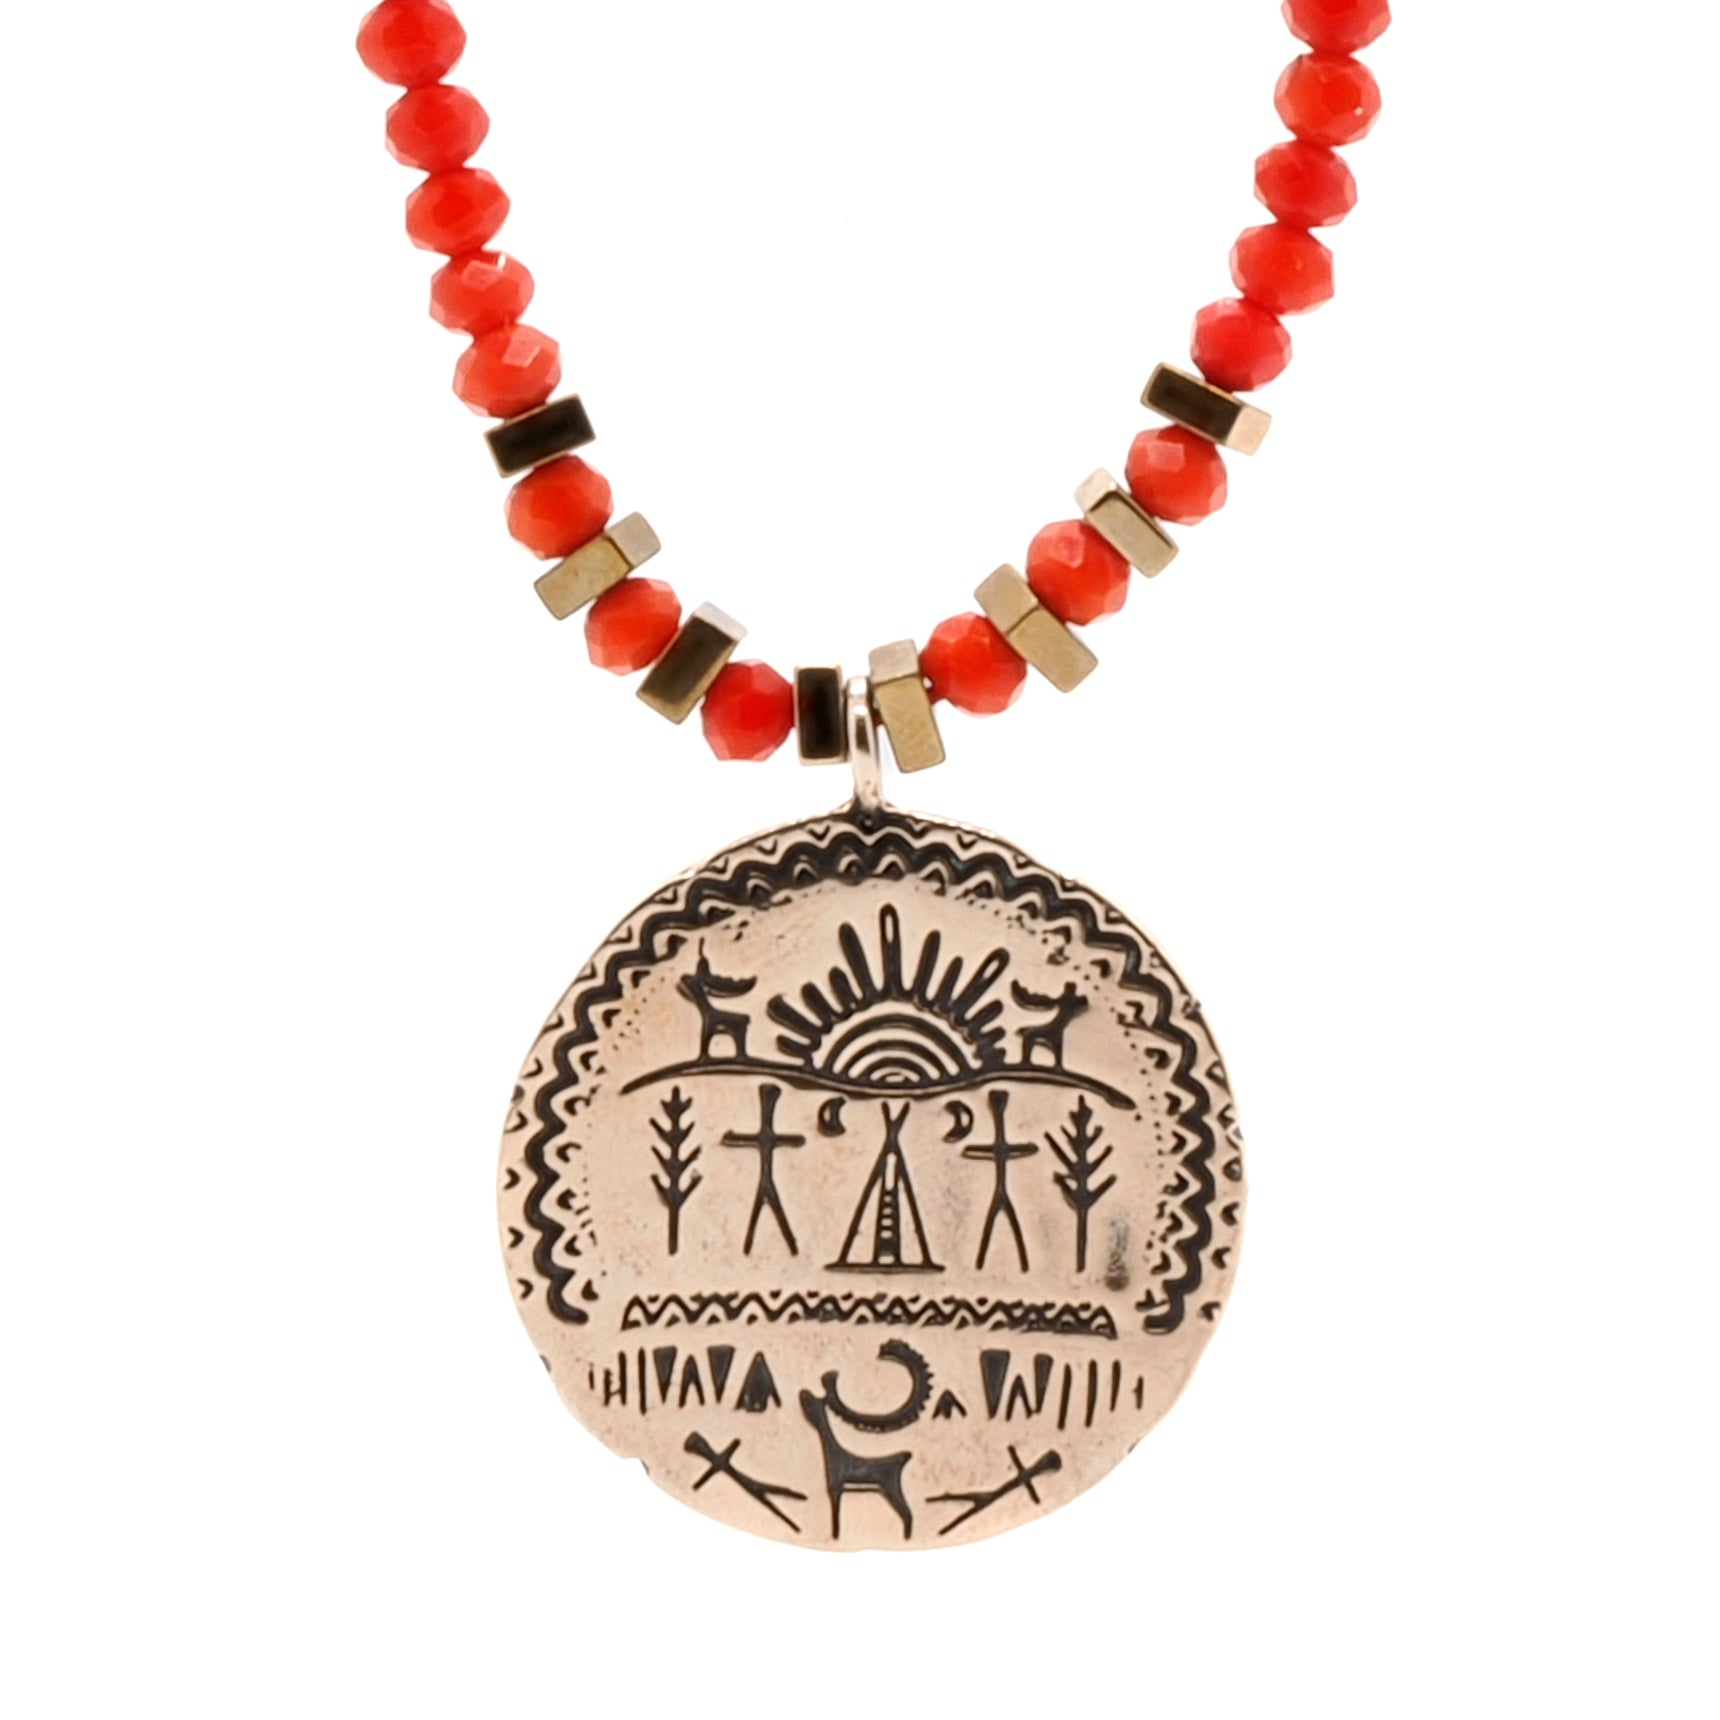 Shaman Talisman Necklace - Experience the divine energy and protection of this handmade piece.